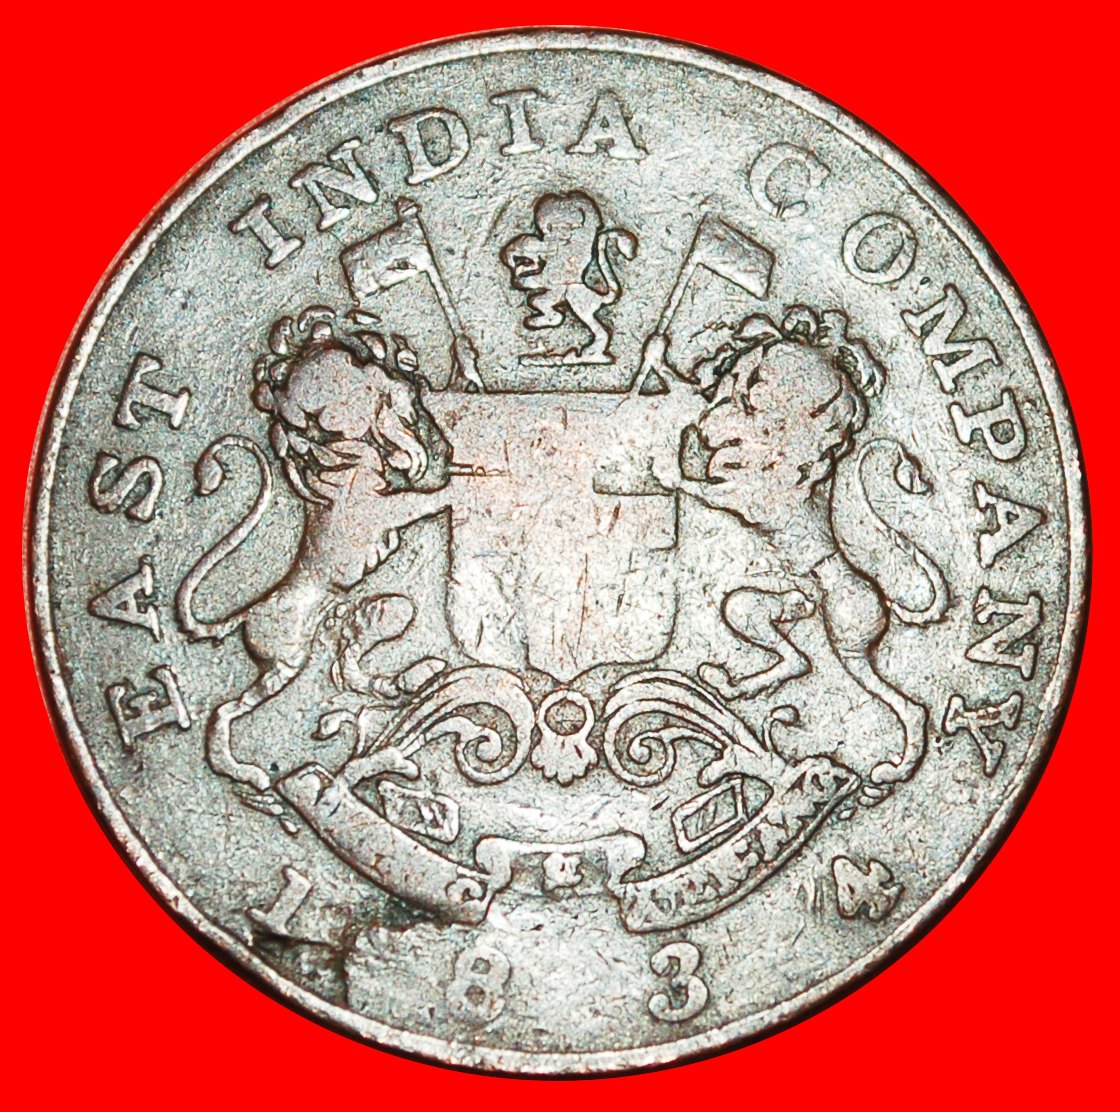  + SCALES: EAST INDIA COMPANY ★ 1/2 ANNA 1834-1249 UNCOMMON! LOW START ★ NO RESERVE!   